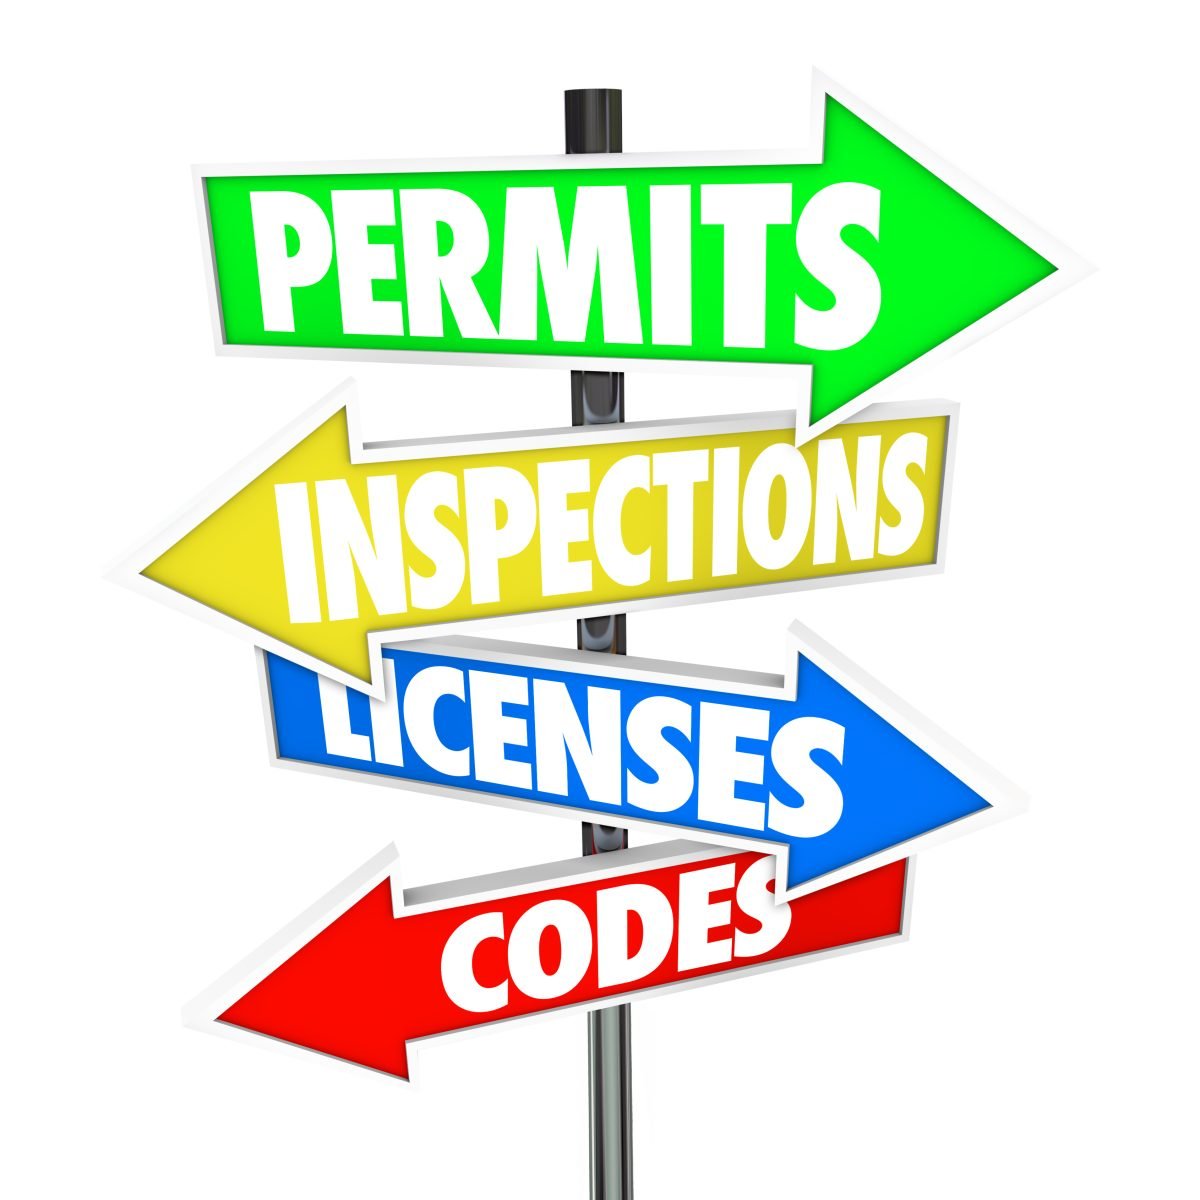 When Do You Require a Building Permit?